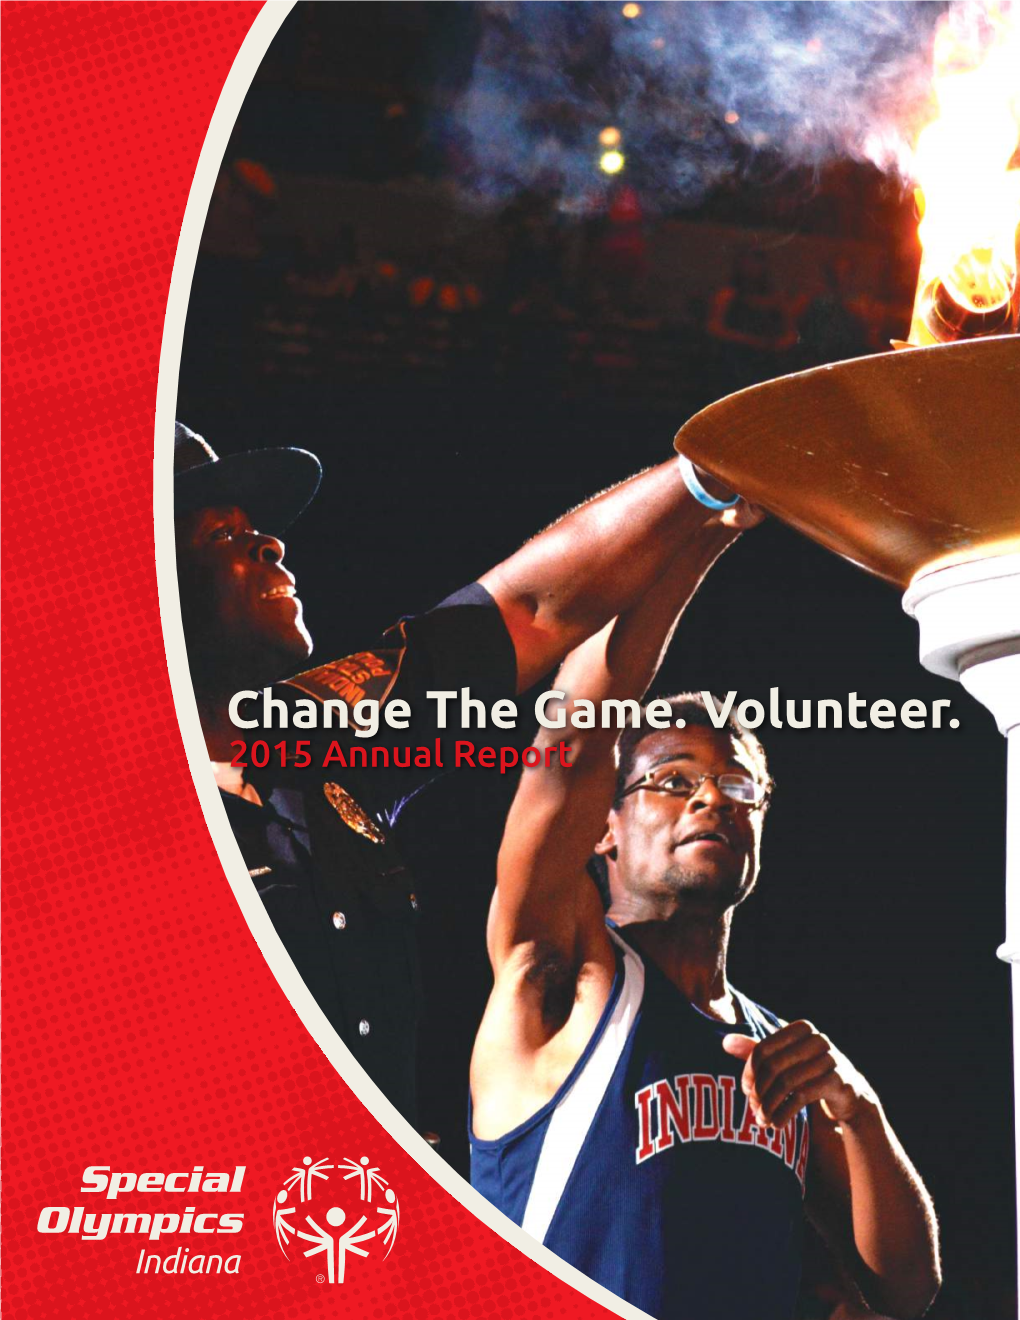 Change the Game. Volunteer. 2015 Annual Report